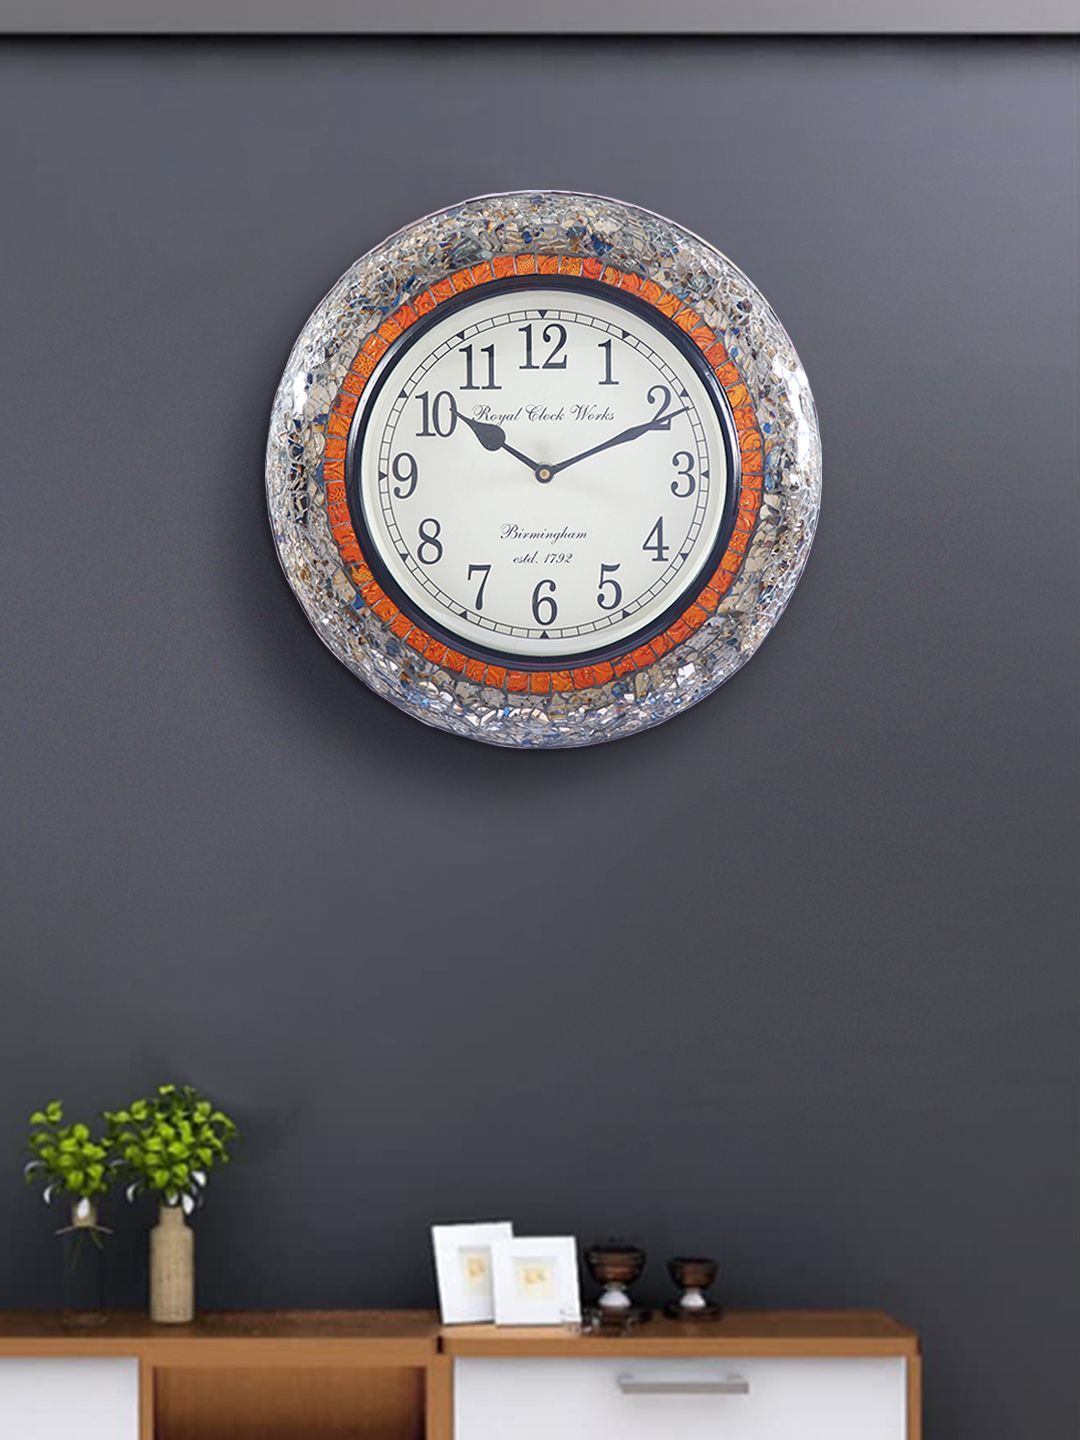 Aapno Rajasthan Grey & Copper-Toned Textured Contemporary Wall Clock Price in India